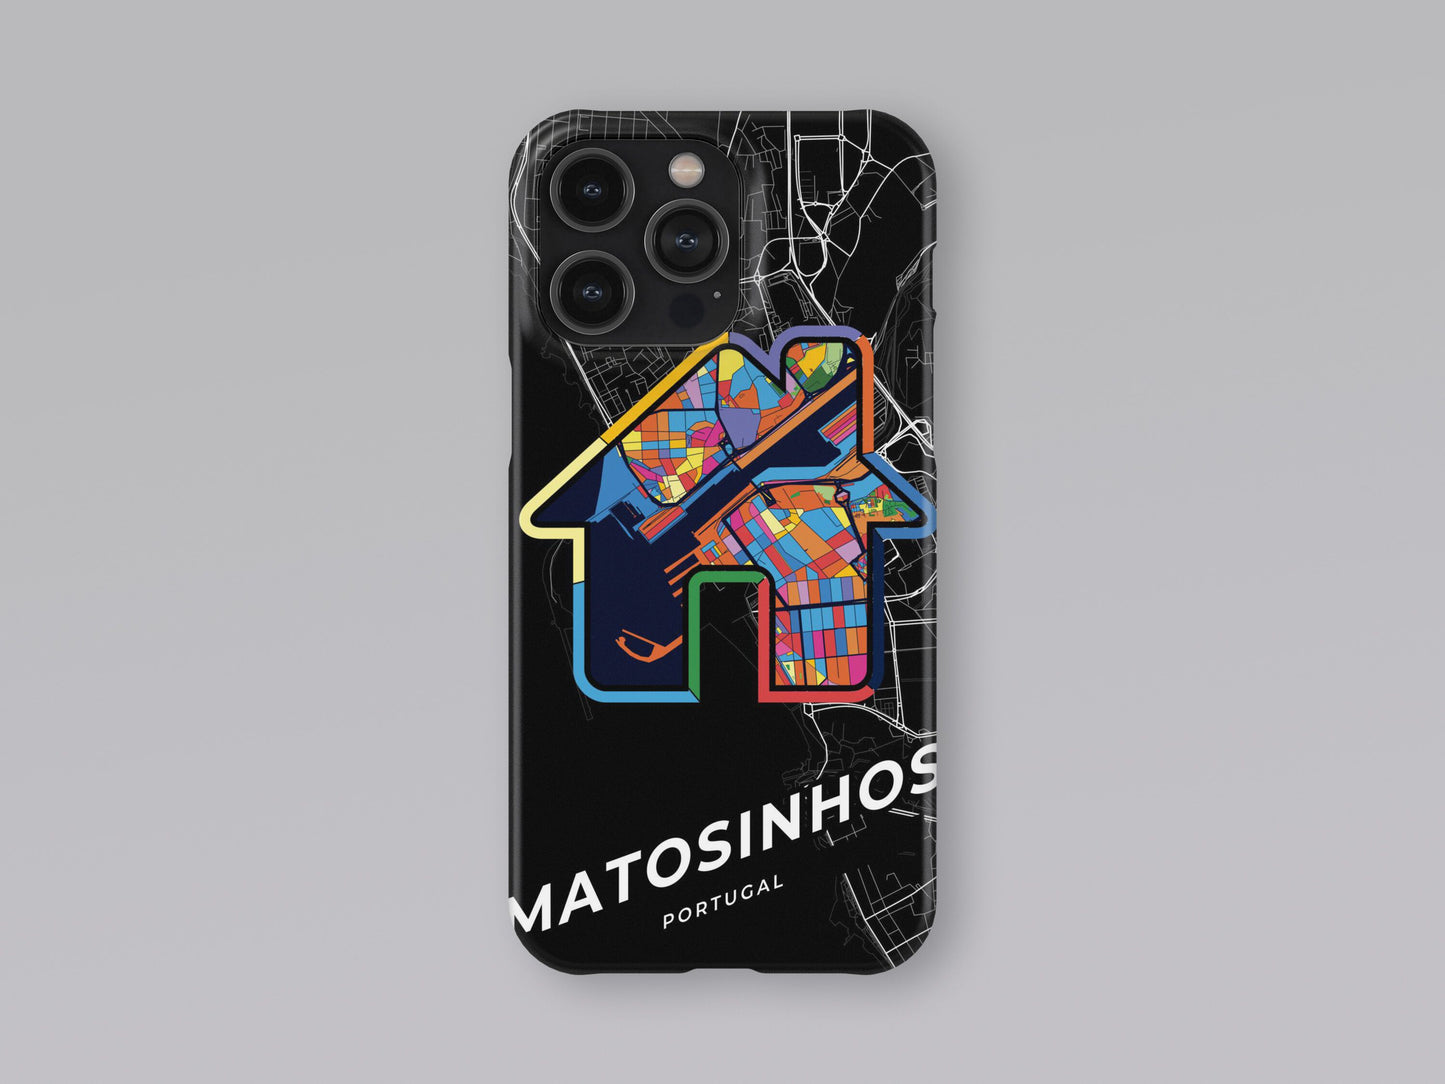 Matosinhos Portugal slim phone case with colorful icon. Birthday, wedding or housewarming gift. Couple match cases. 3